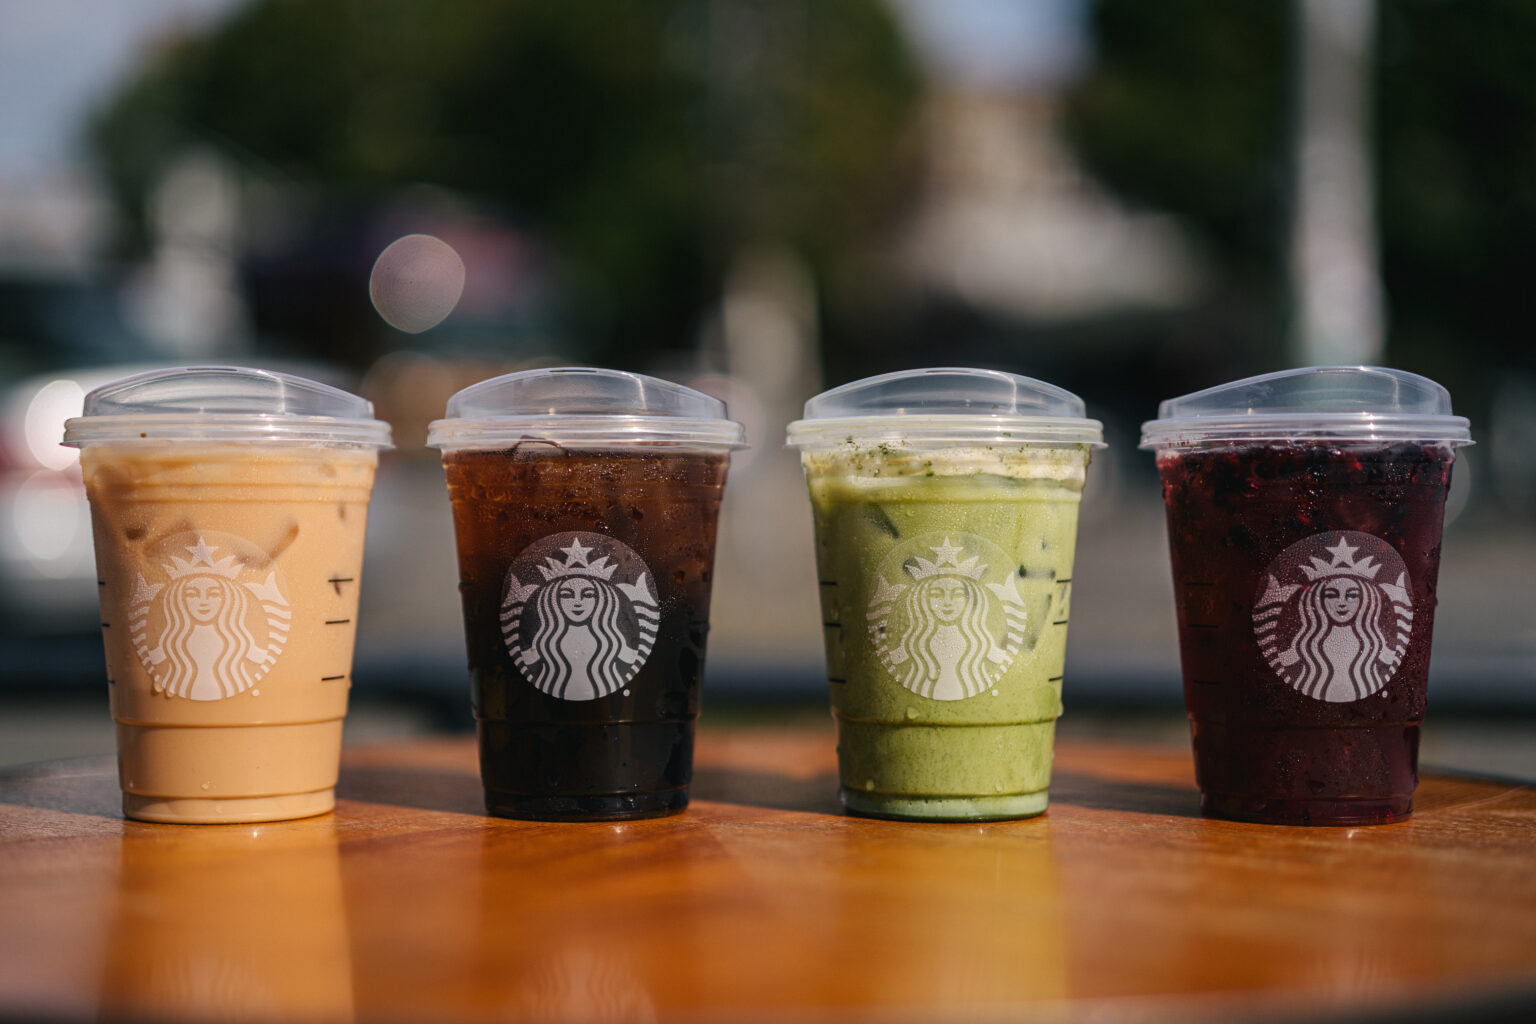 Starbucks Iced Drinks Will Come With Strawless Lids